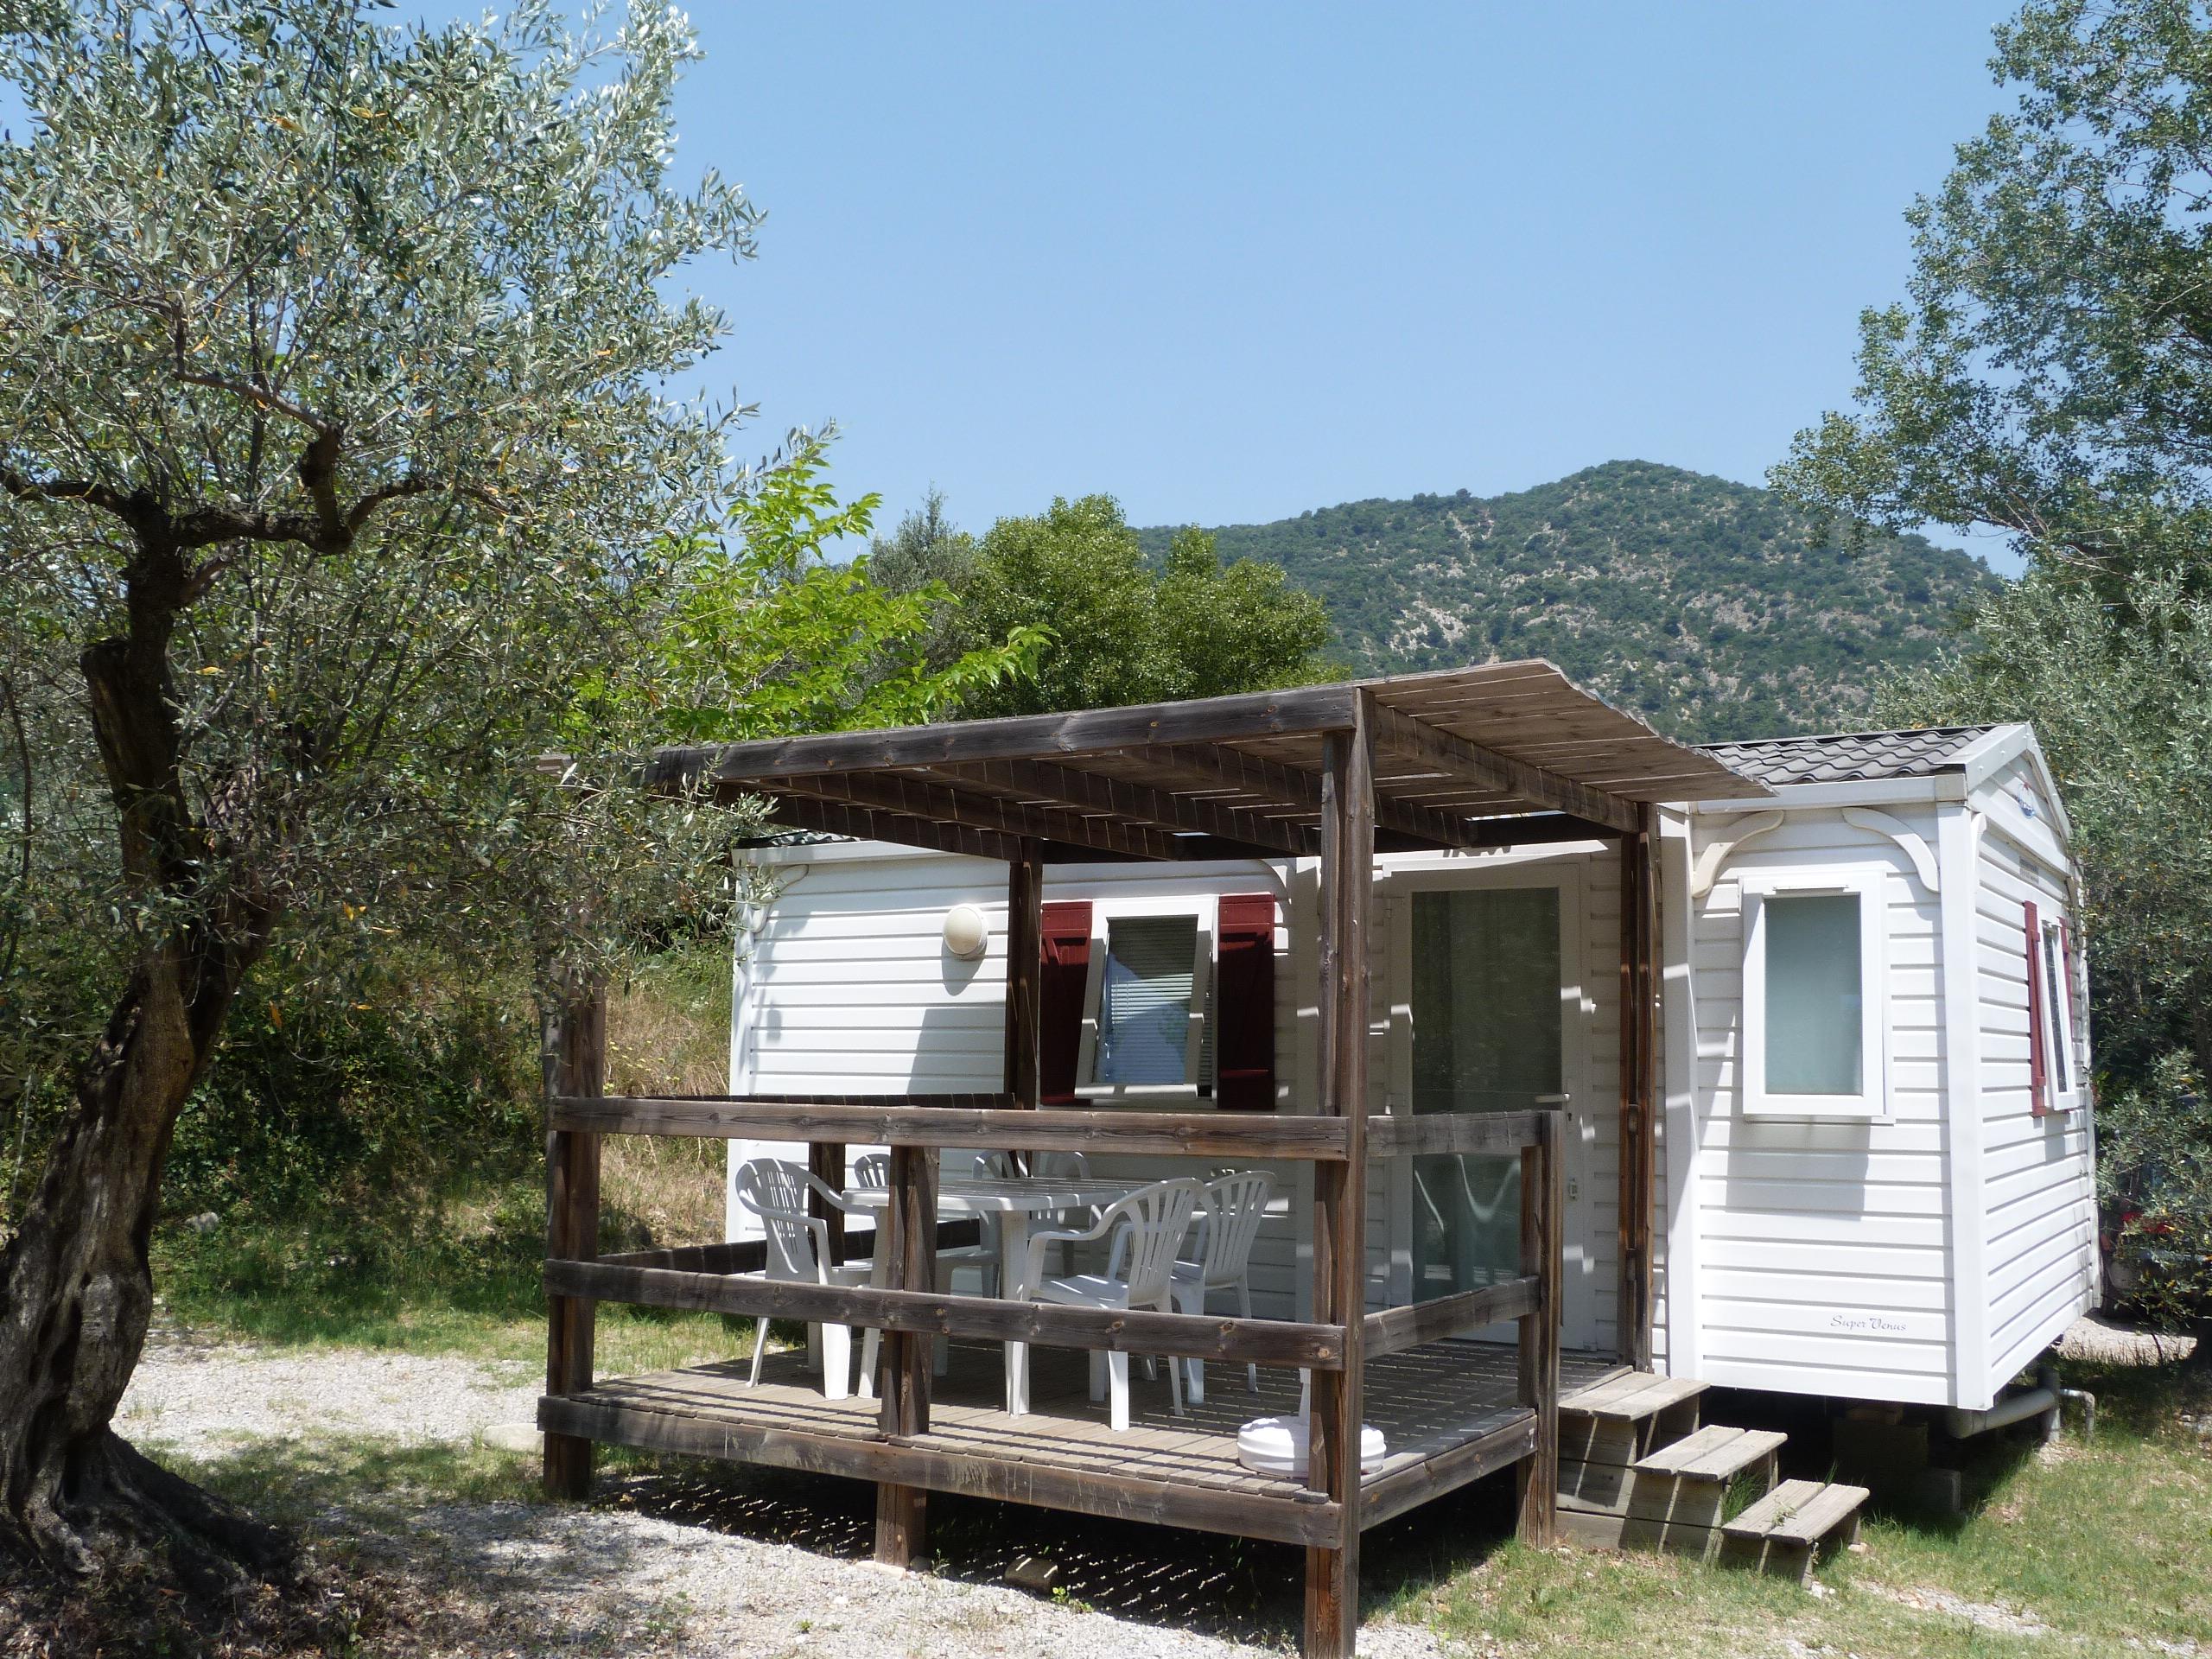 Accommodation - Mobile-Home Irm Vénus 2 Bedrooms 24 M² Saturday/Saturday - CAMPING LES CLOS